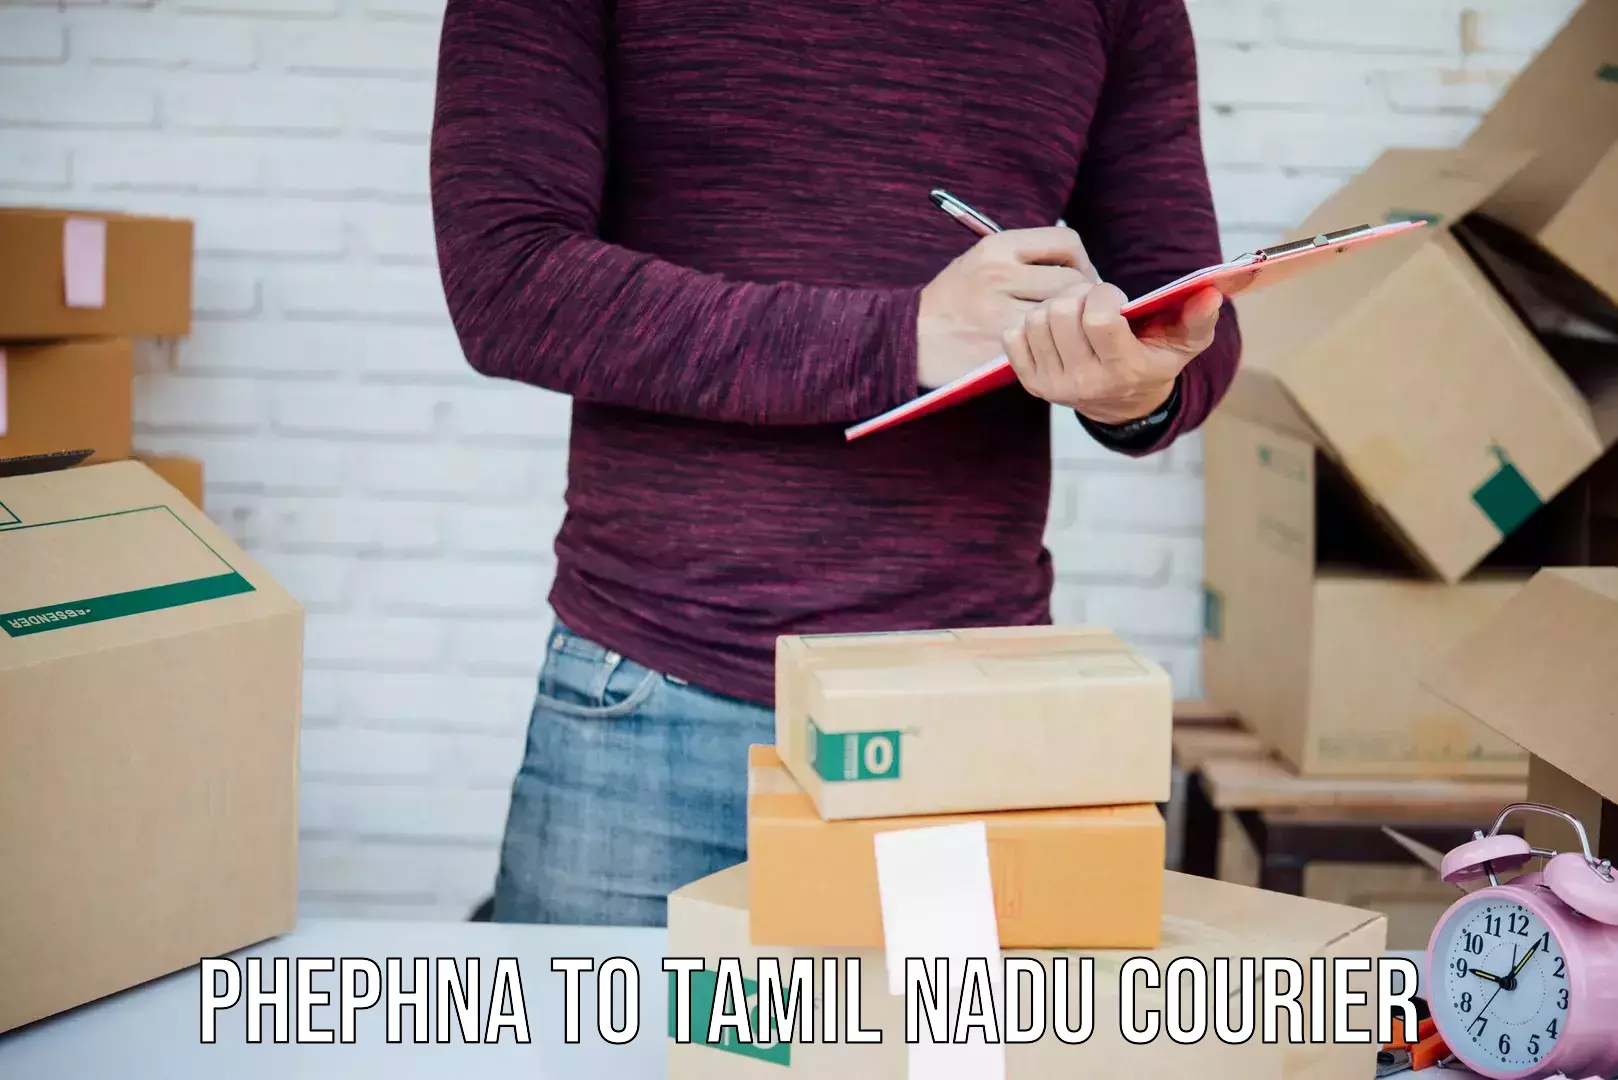 Streamlined delivery processes Phephna to Tamil Nadu